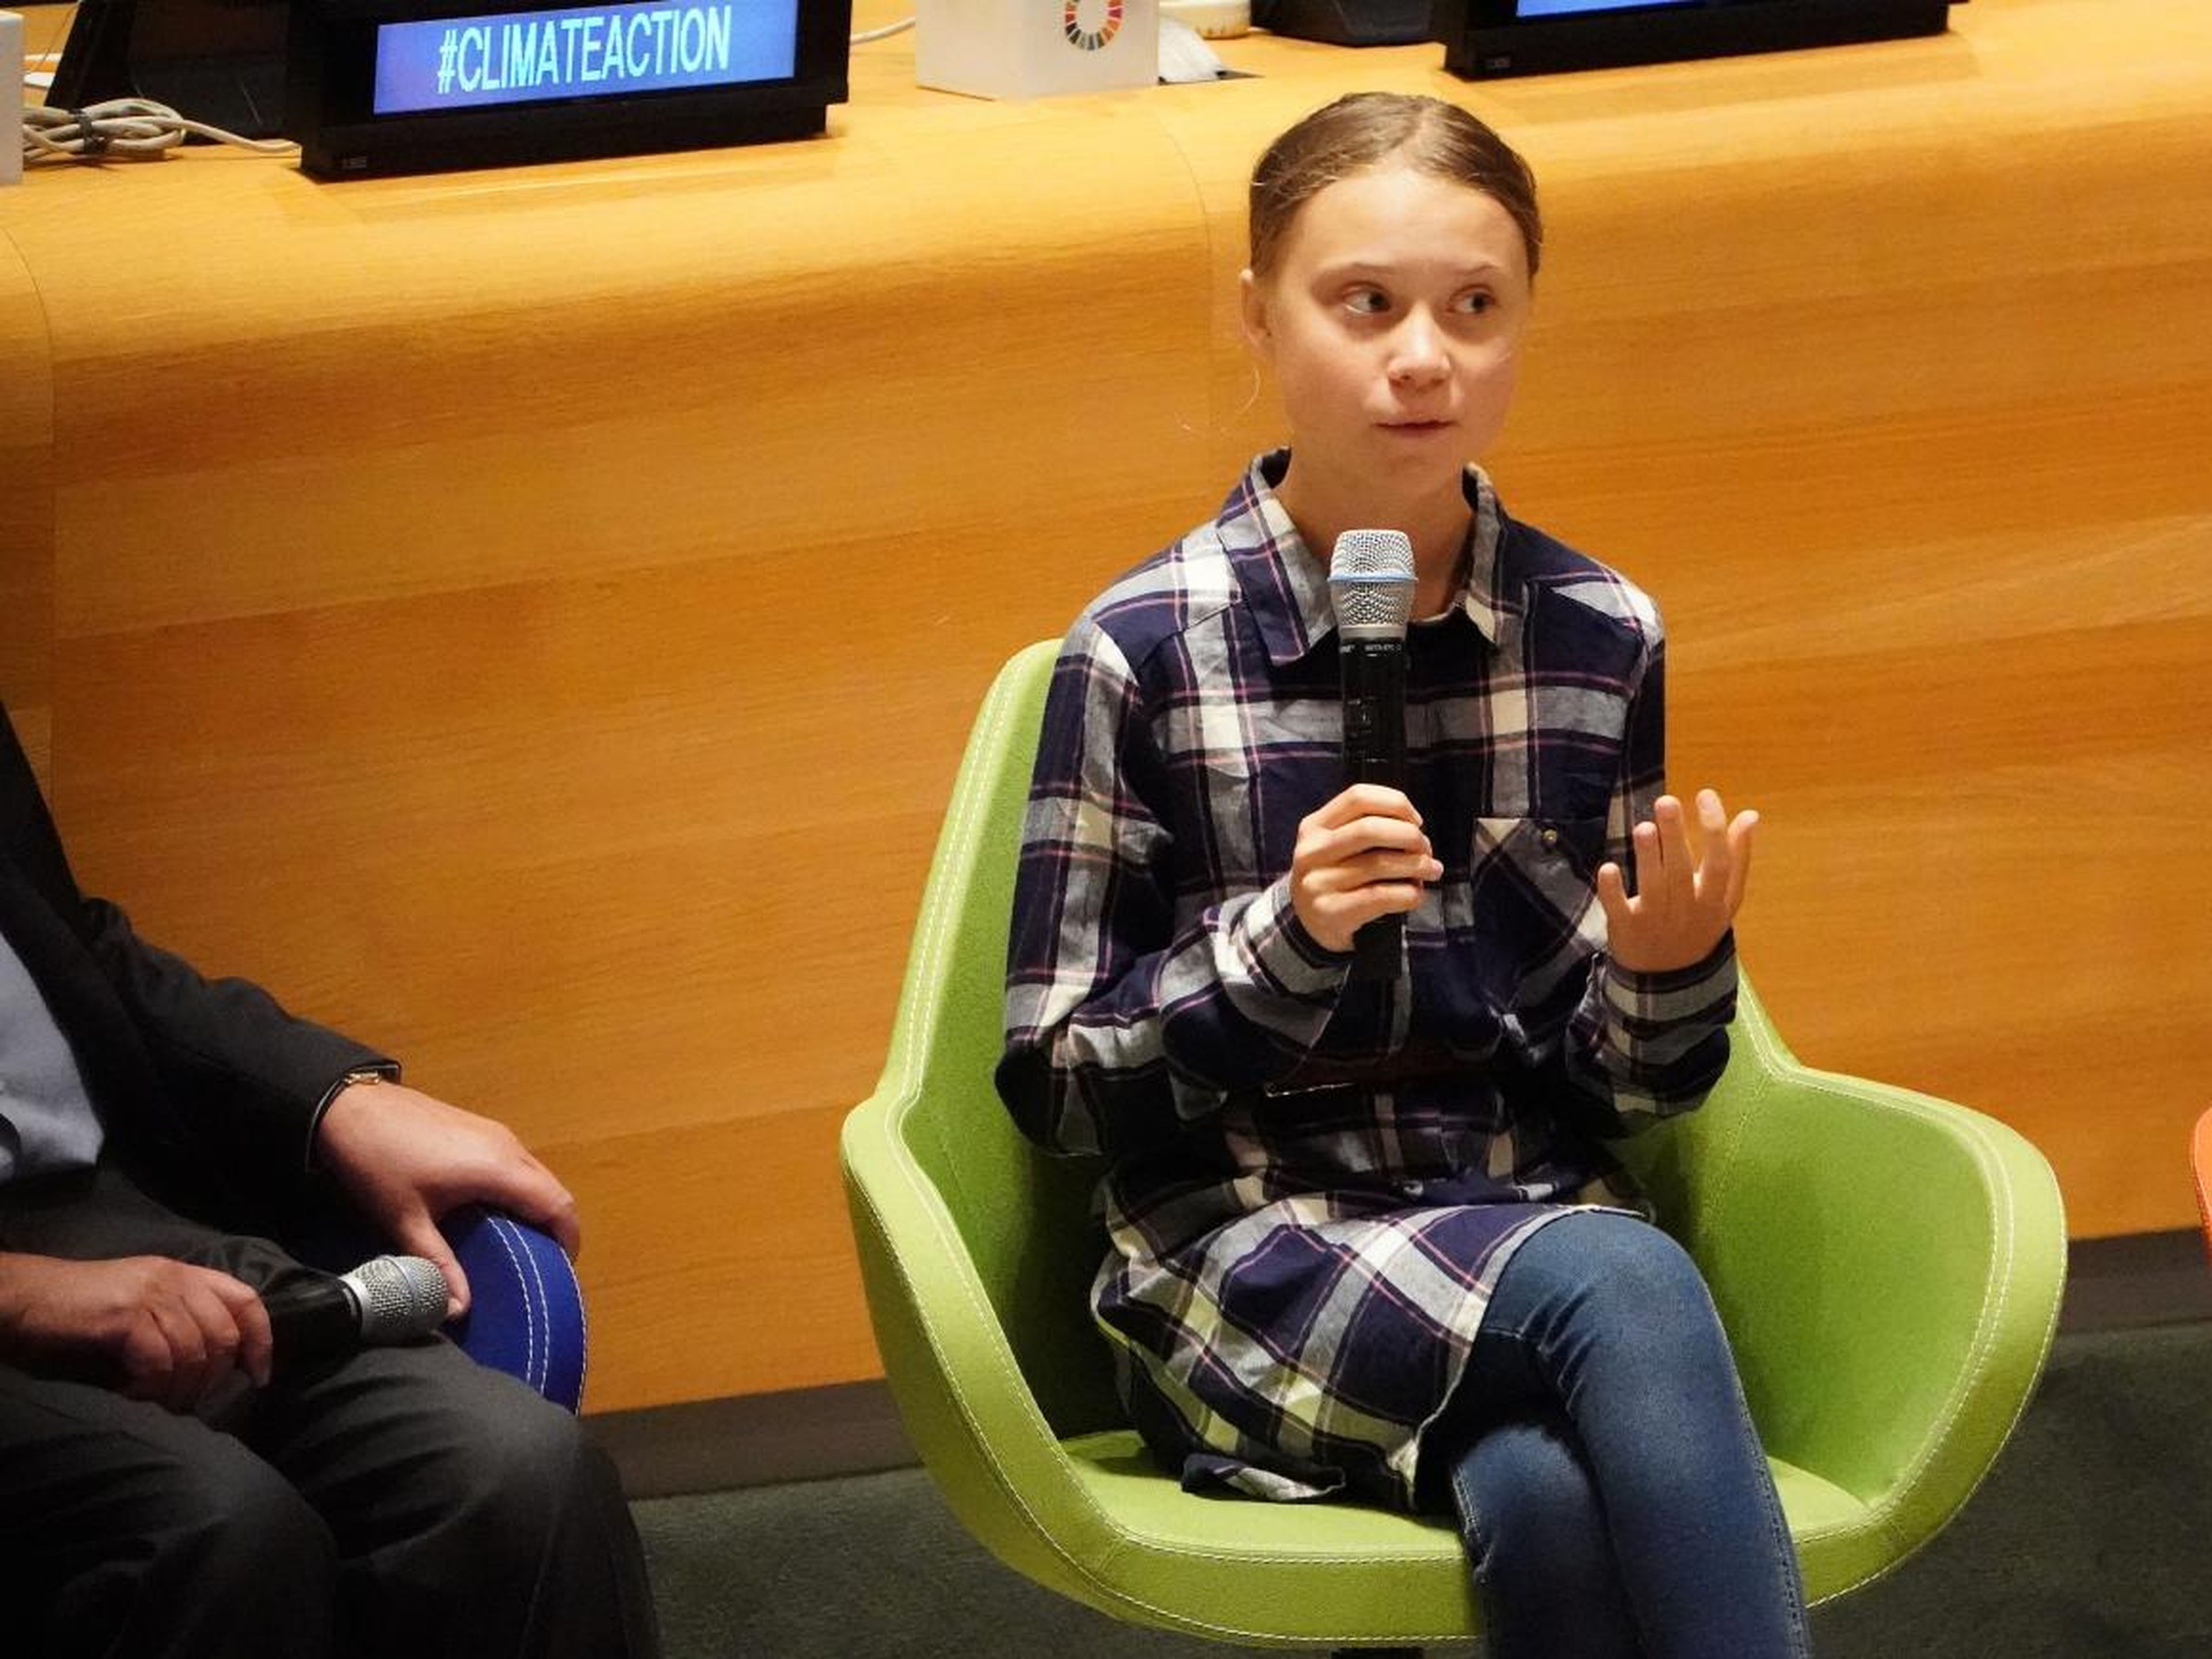 On Saturday, Thunberg spoke at the UN Youth Climate Summit.